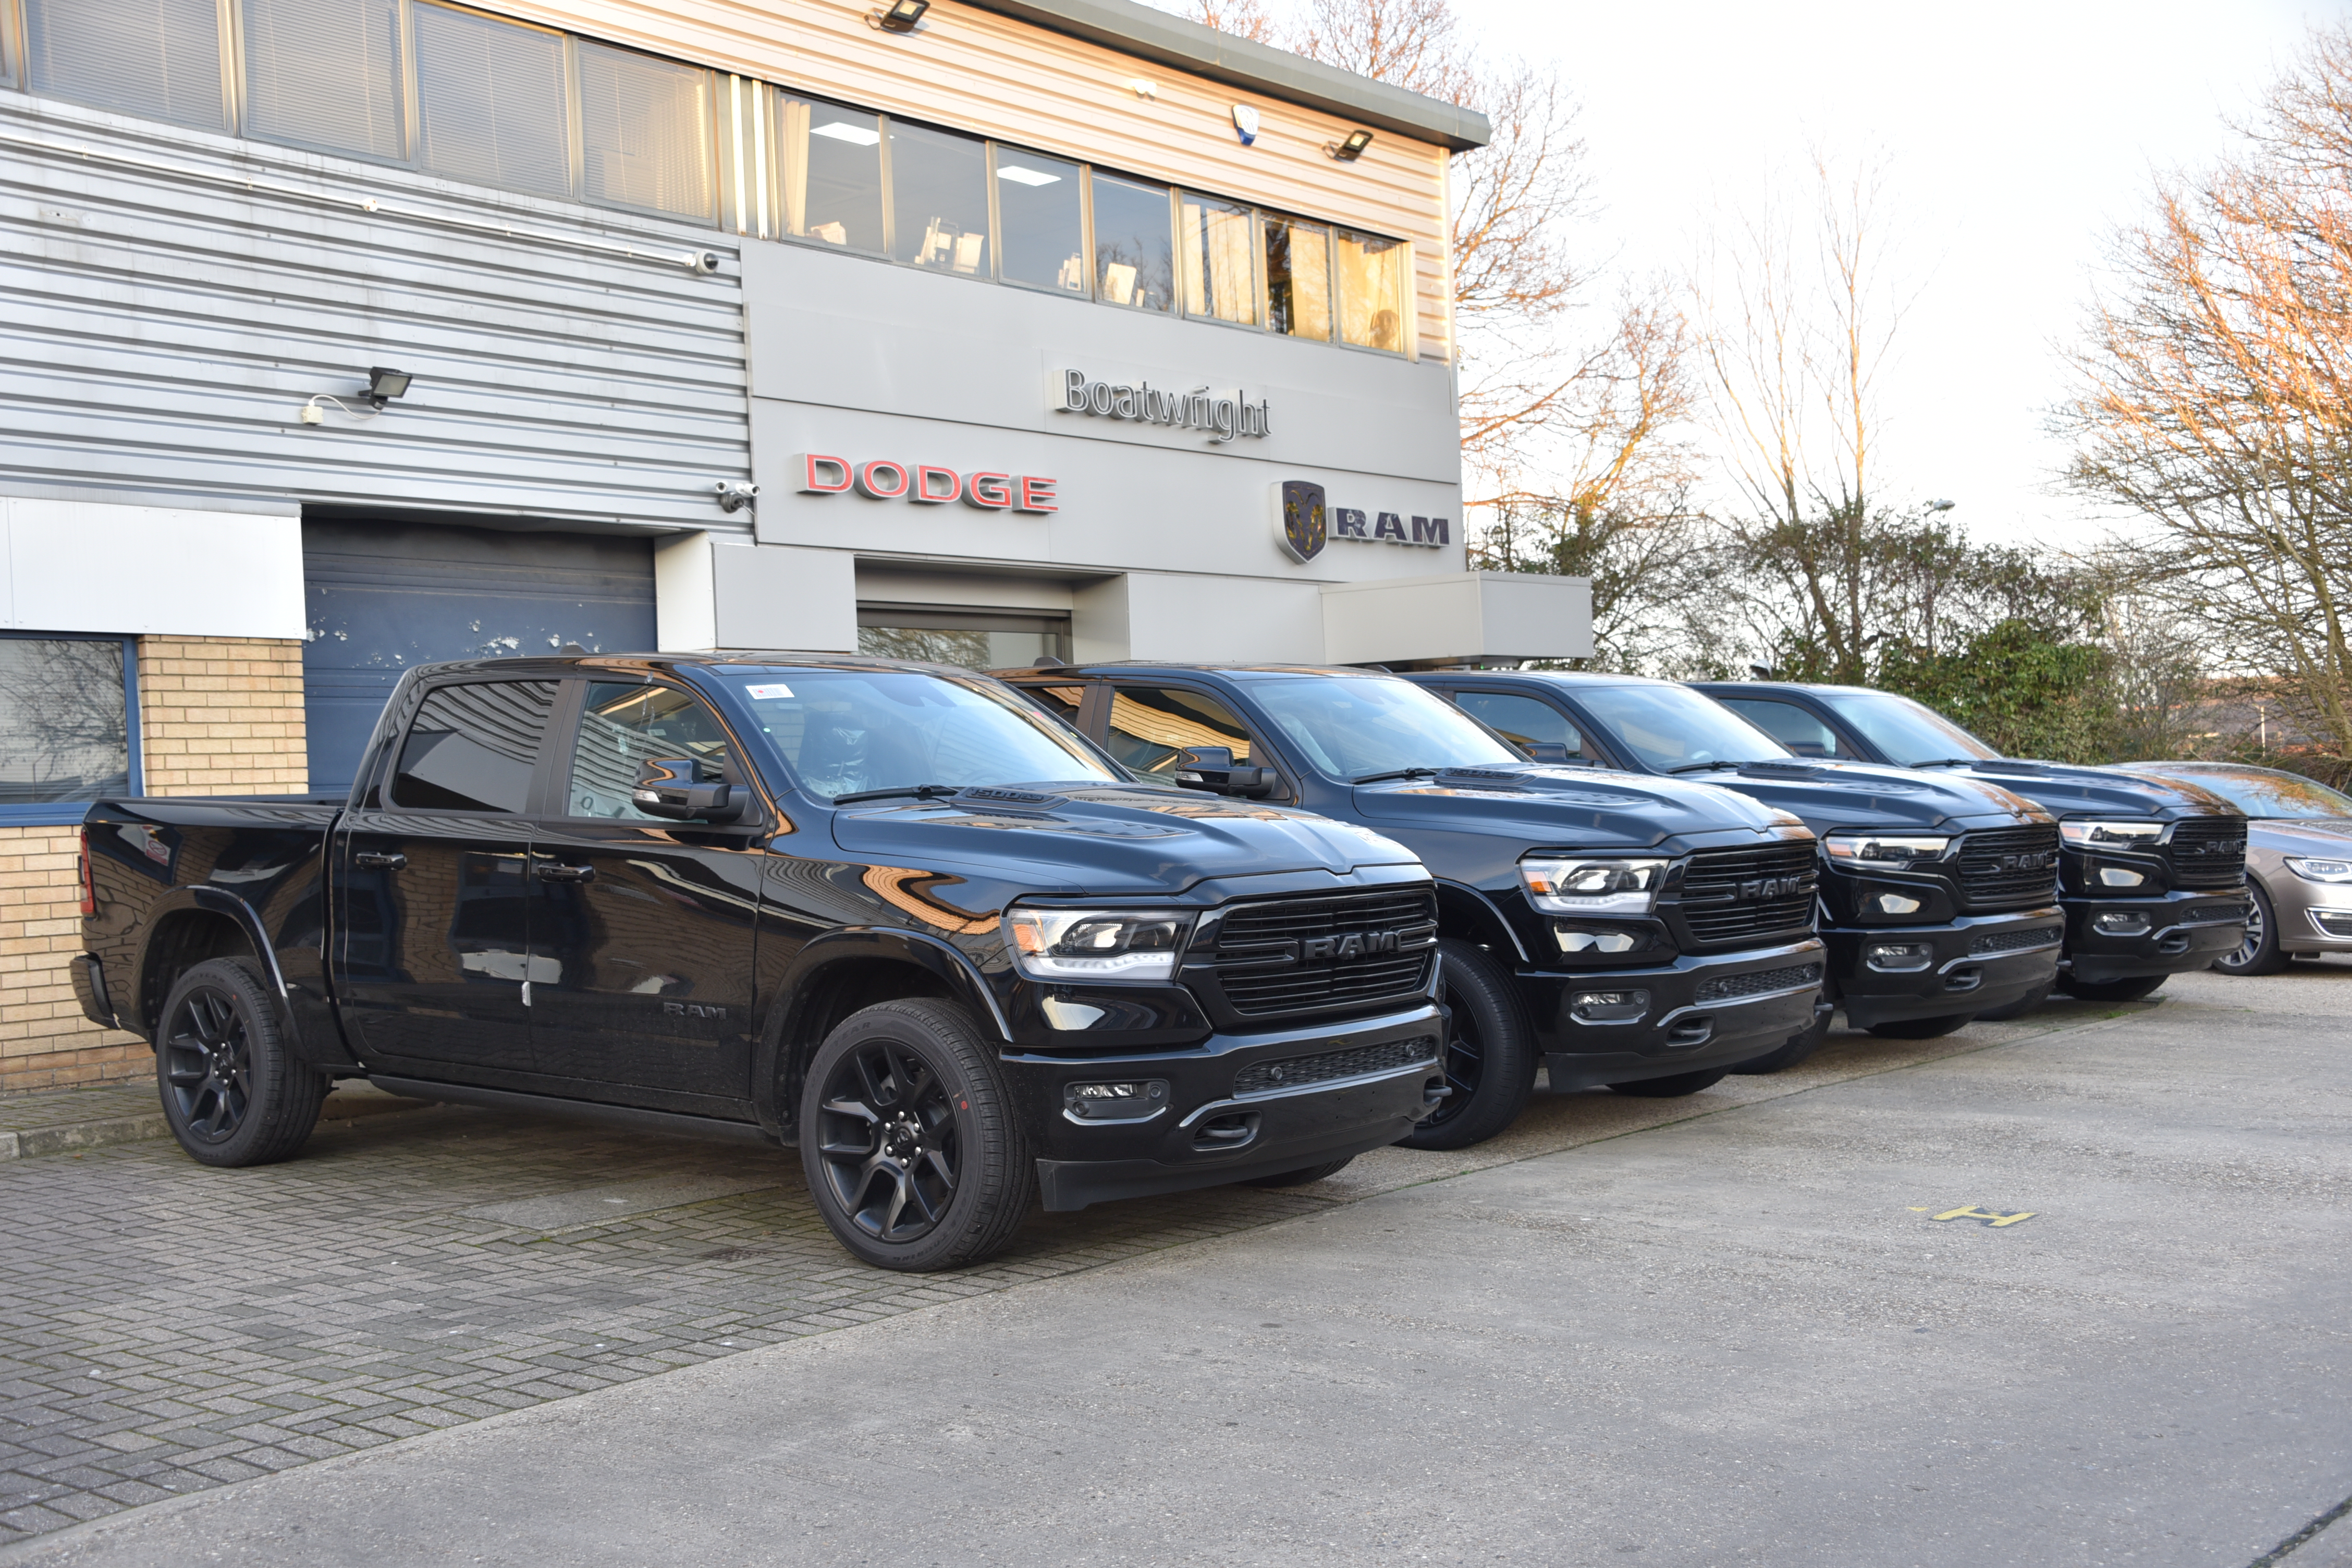 2021 New Dodge Ram for Sale in the UK